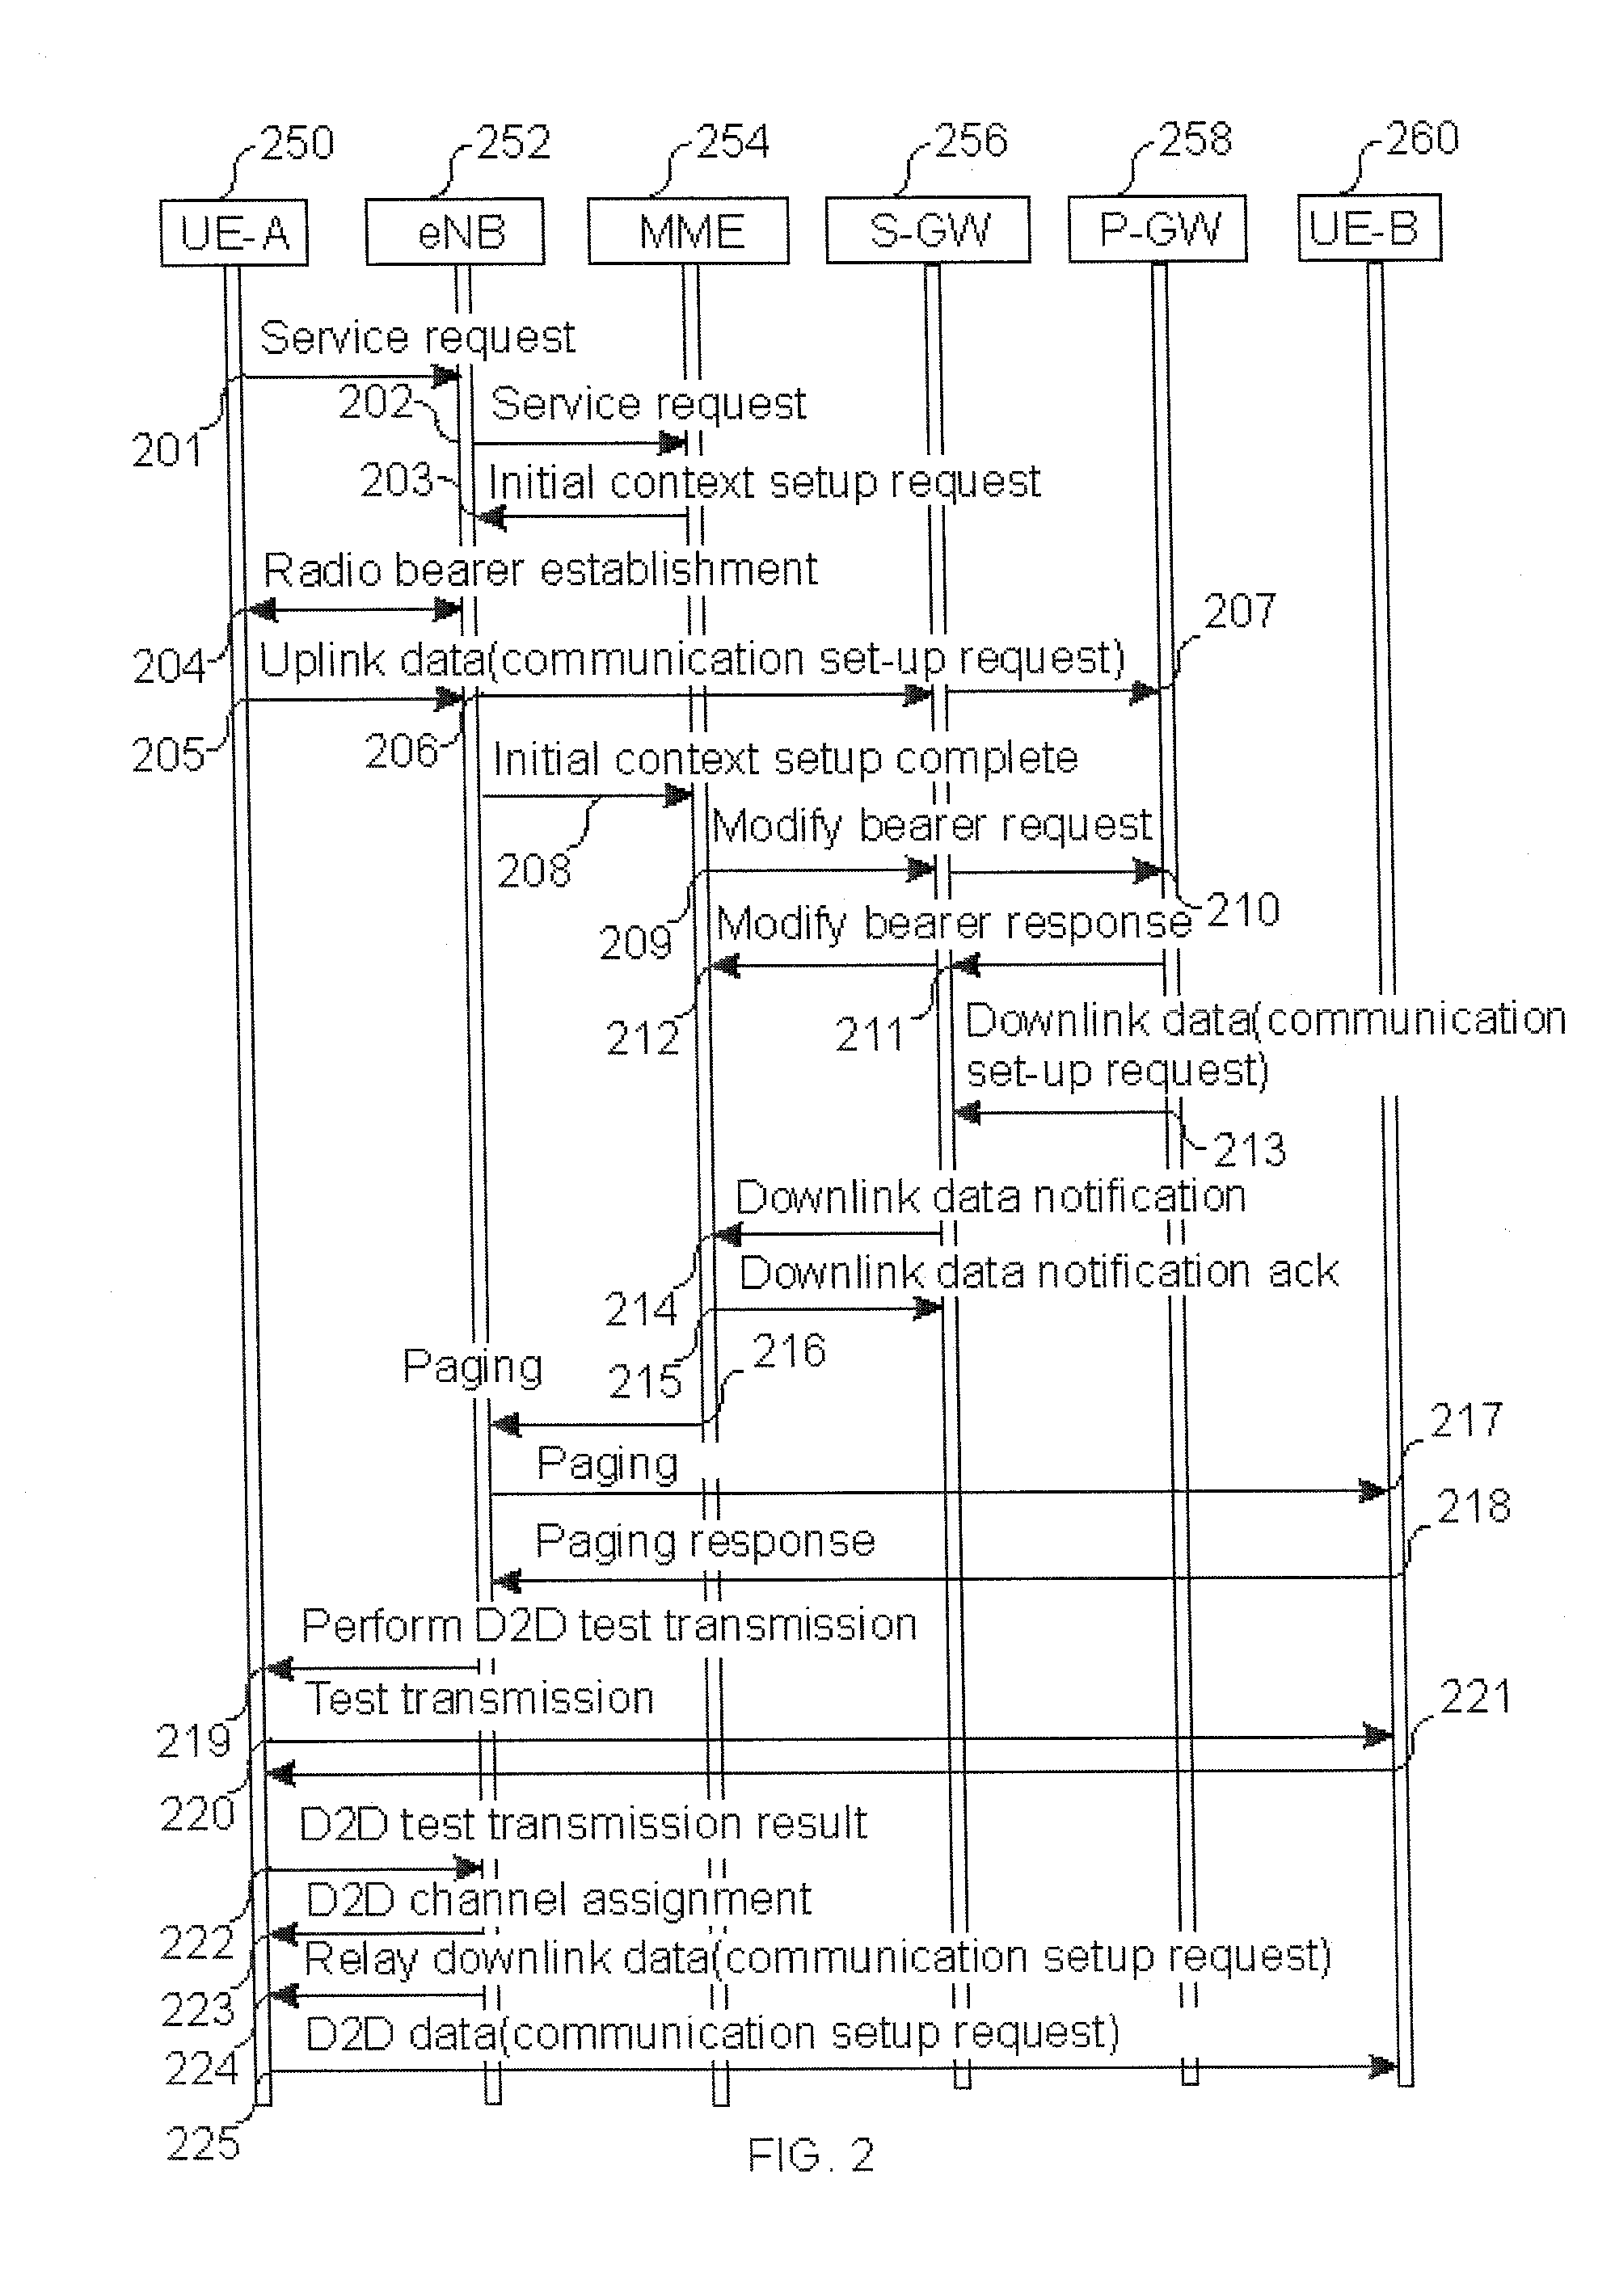 Apparatus and Method for Direct Device-to-Device Communication in a Mobile Communication System